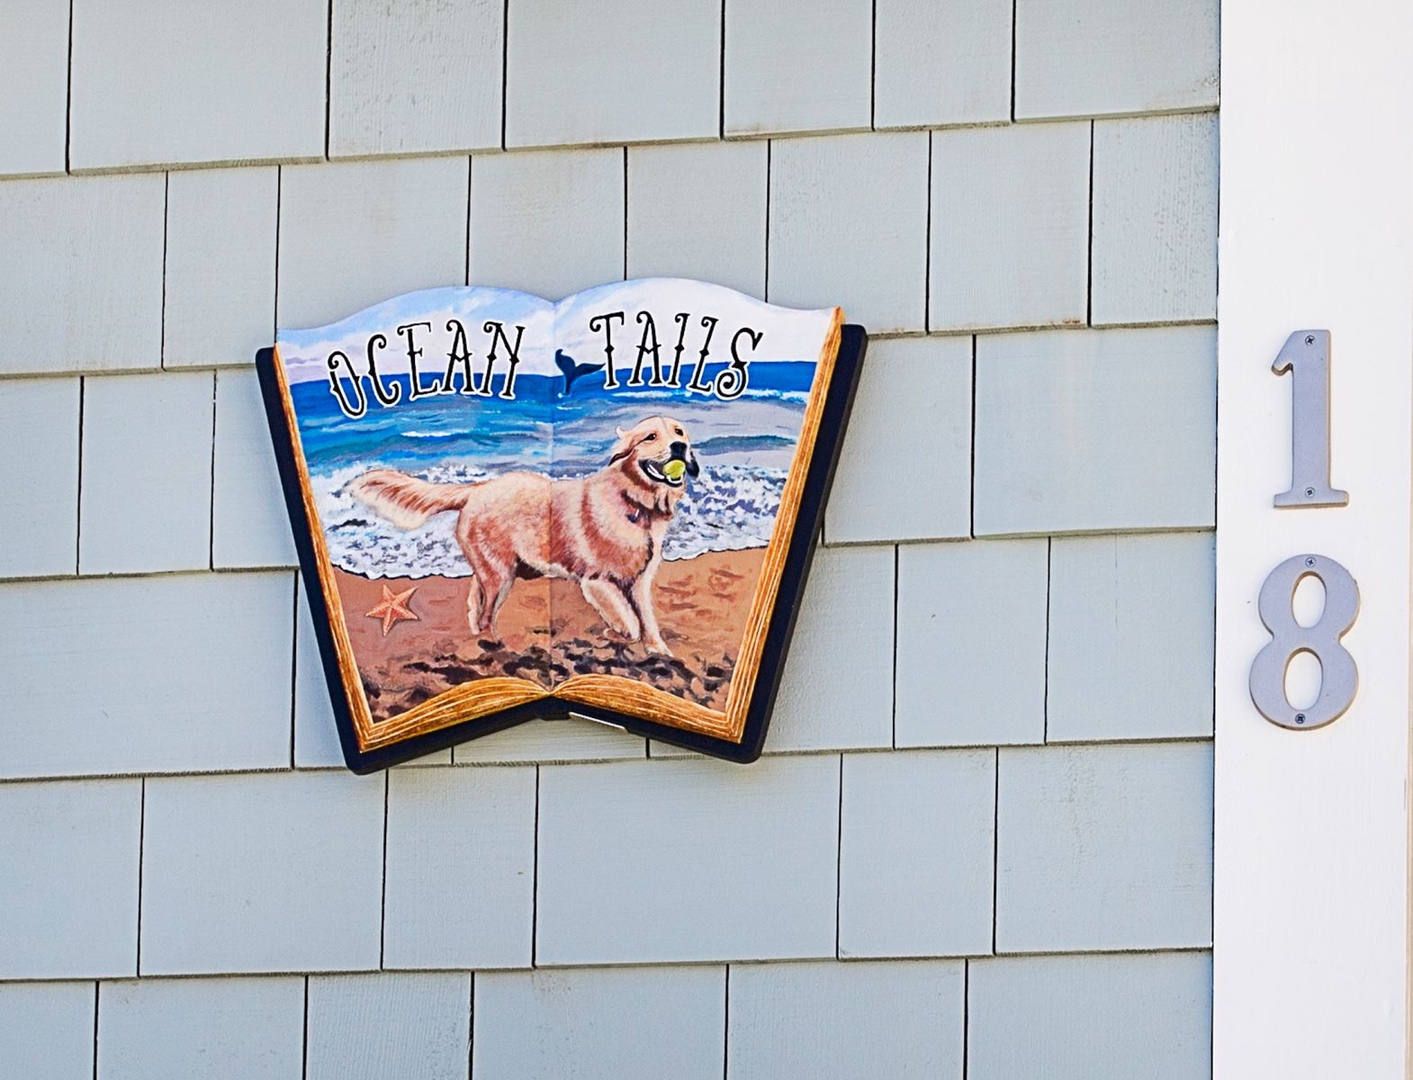 Ocean Tails sign